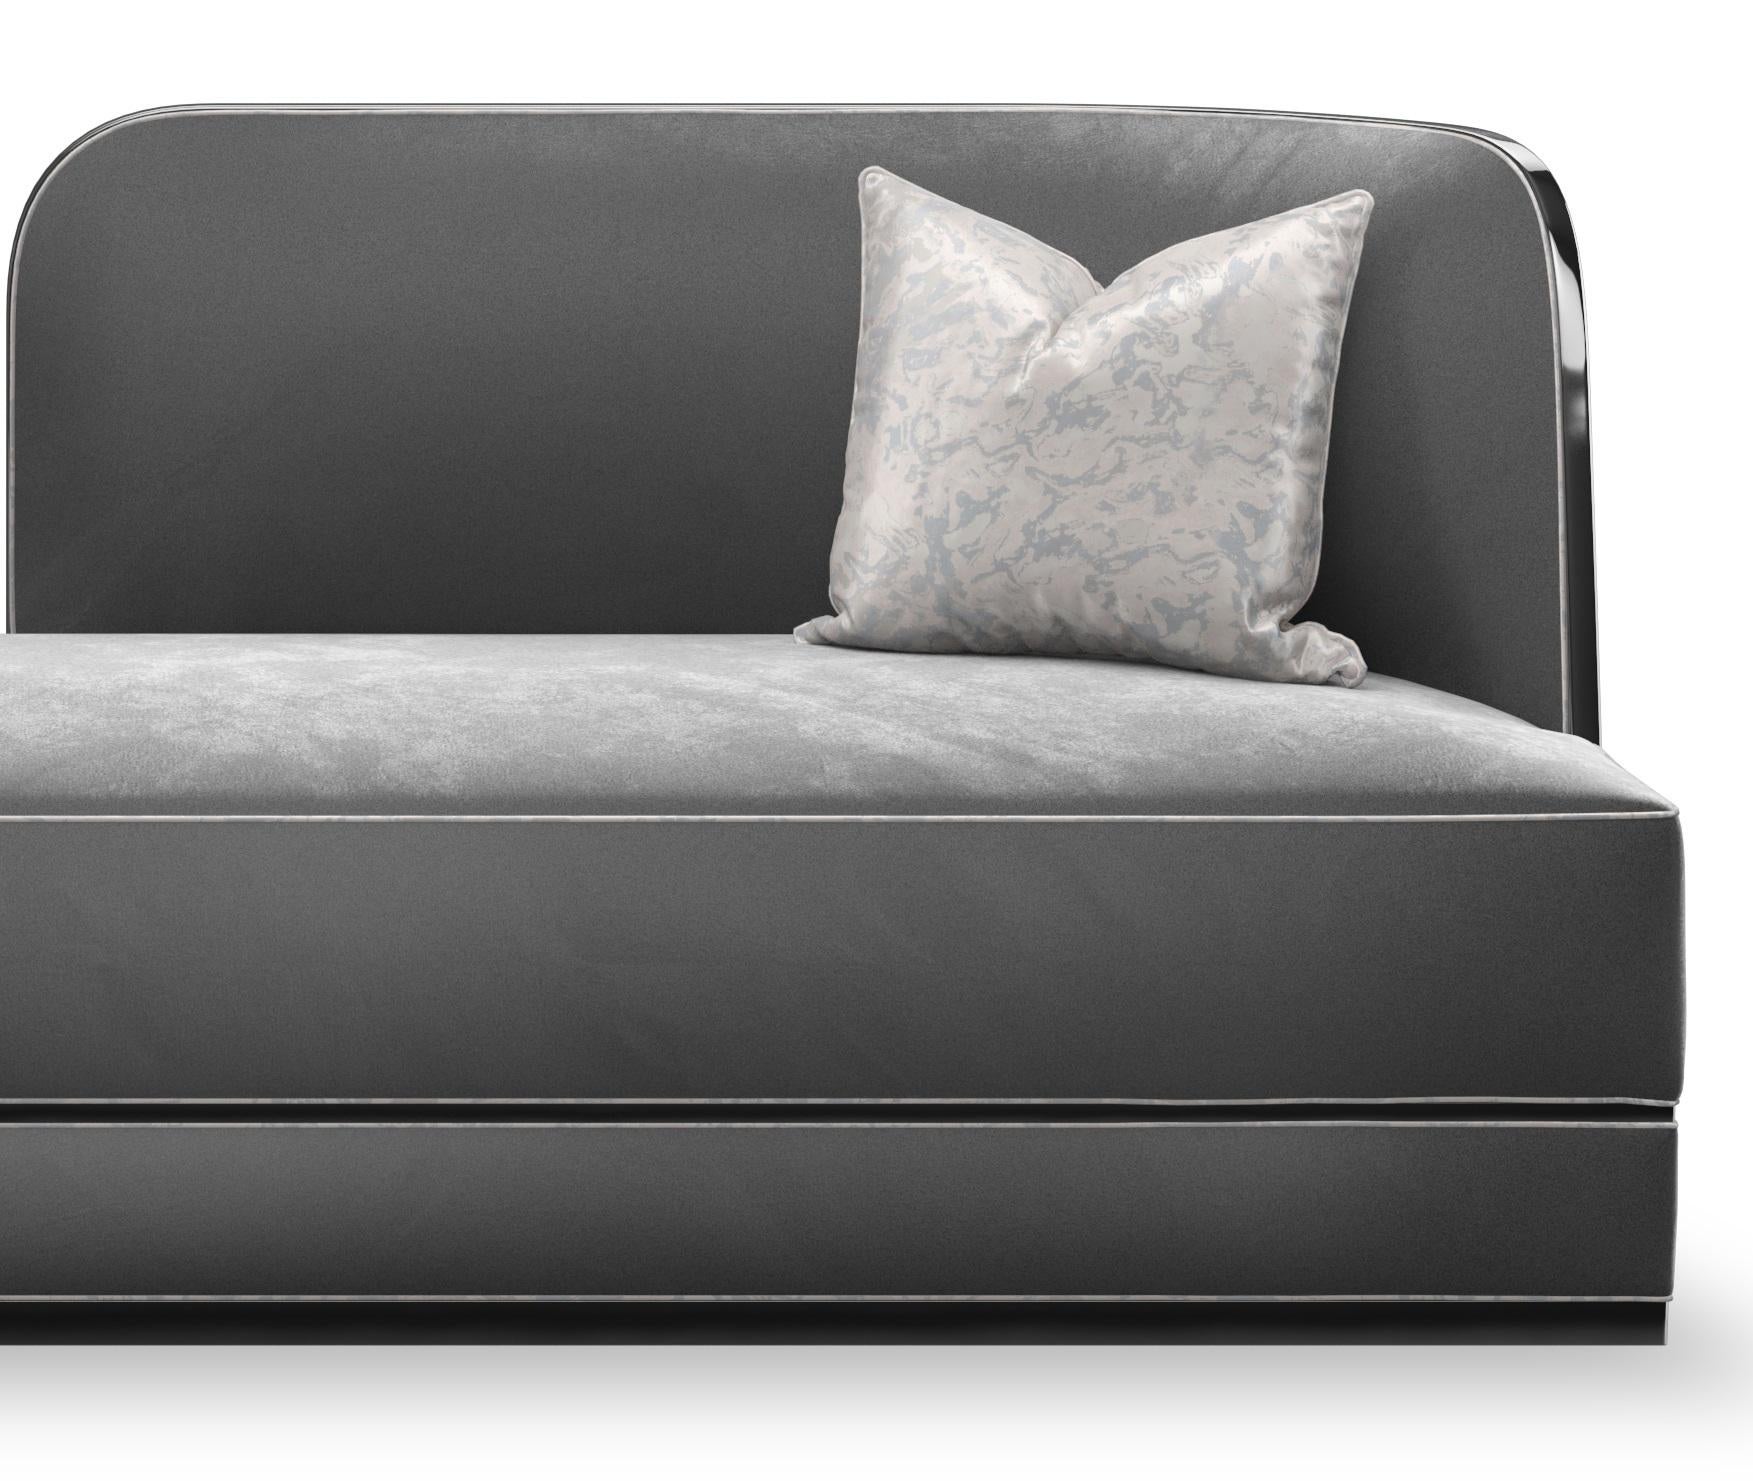 Colette Sofa by Memoir Essence
Dimensions: D 80 x W 220 x H 75 cm.
Materials: Velvet PRS, satin ZNC and lacquer.

Also available in client's fabric. Please contact us.

Colette Sofa is a statement on this collection, presenting a twist between a